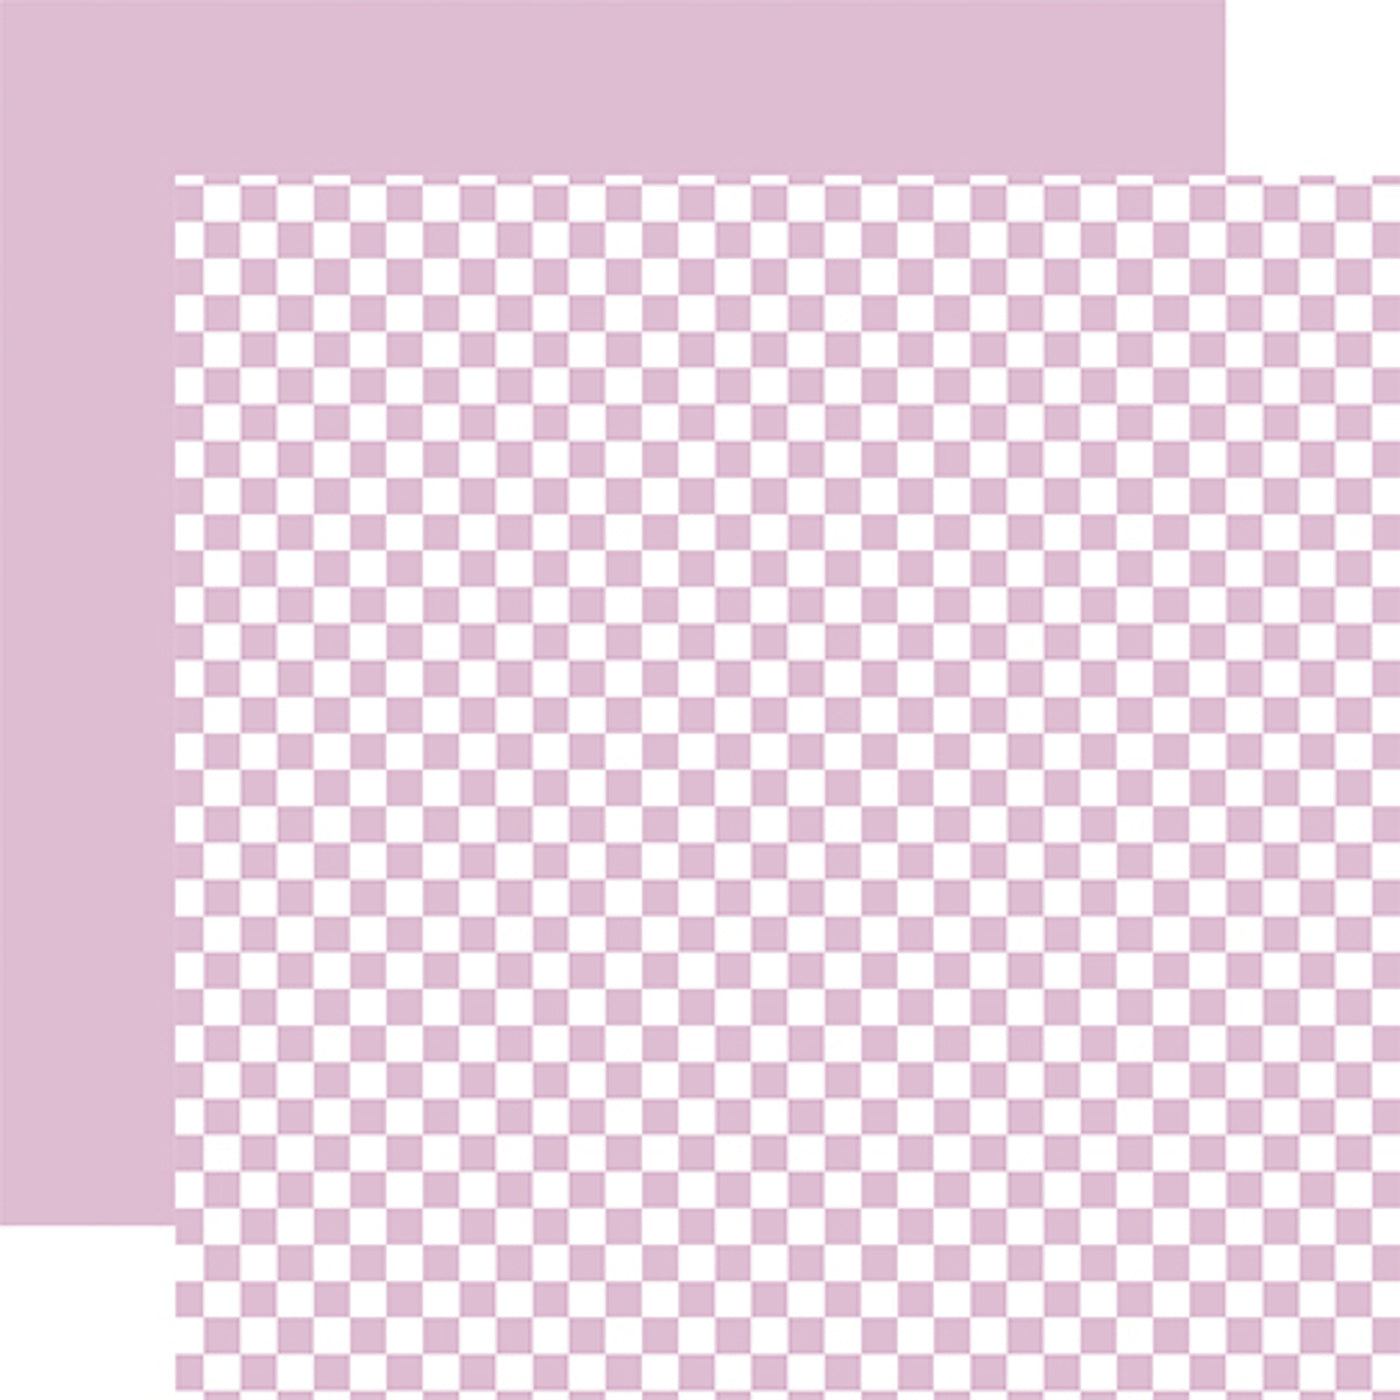 Double-sided 12x12 cardstock sheets - purple checkered, purple solid reverse. 65 lb. smooth cardstock. -Echo Park